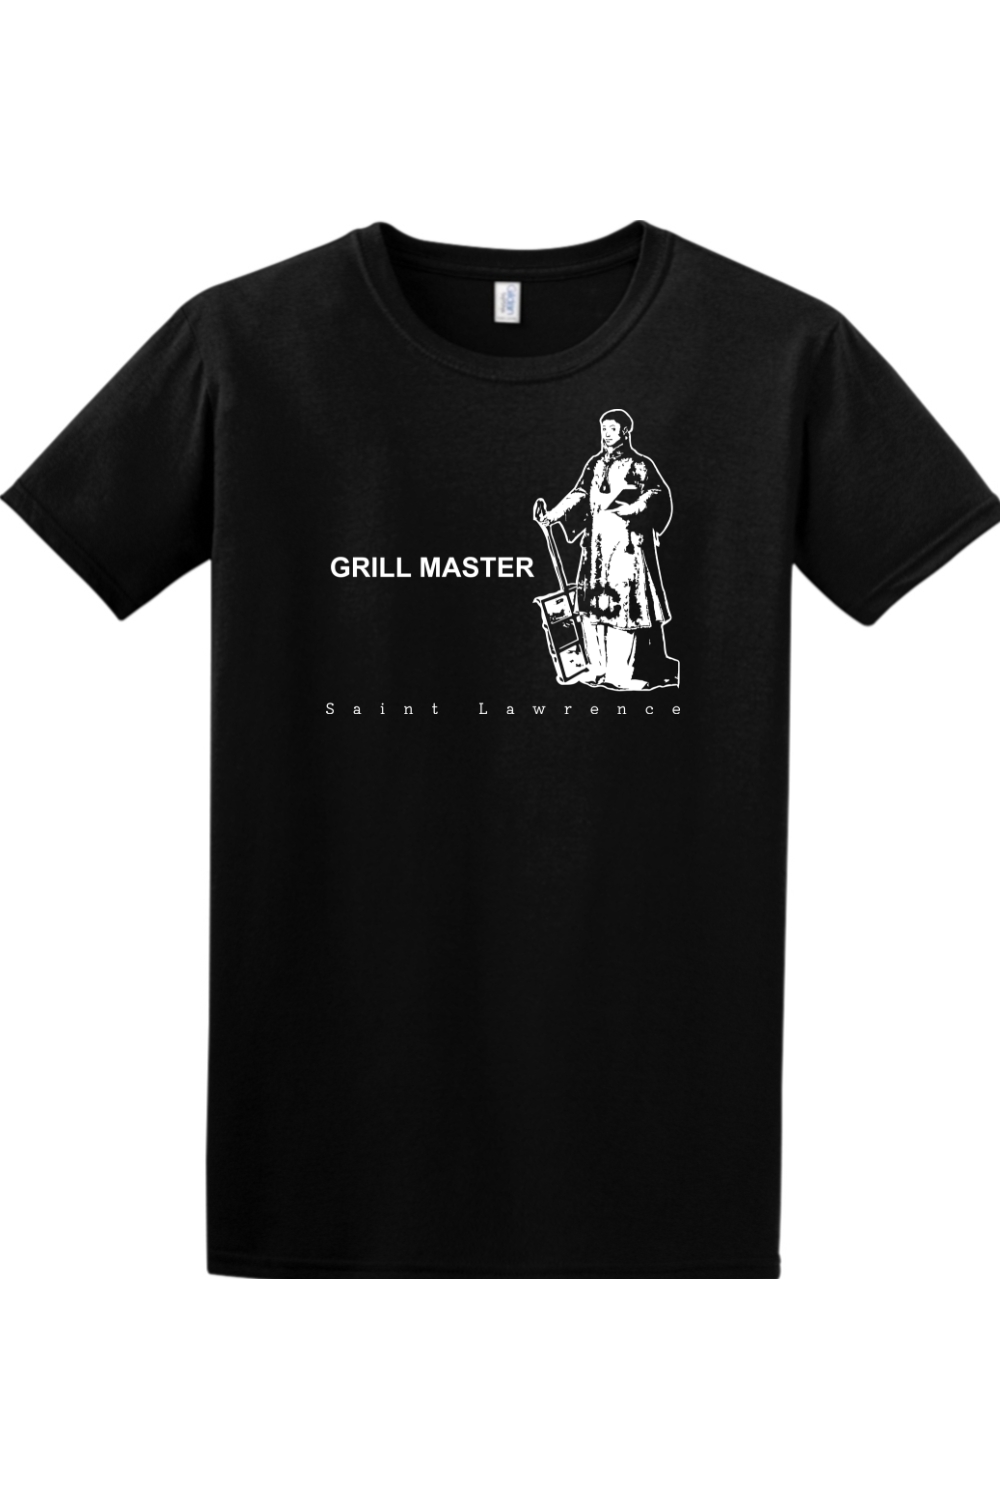 Grill Master - St. Lawrence Adult T-Shirt